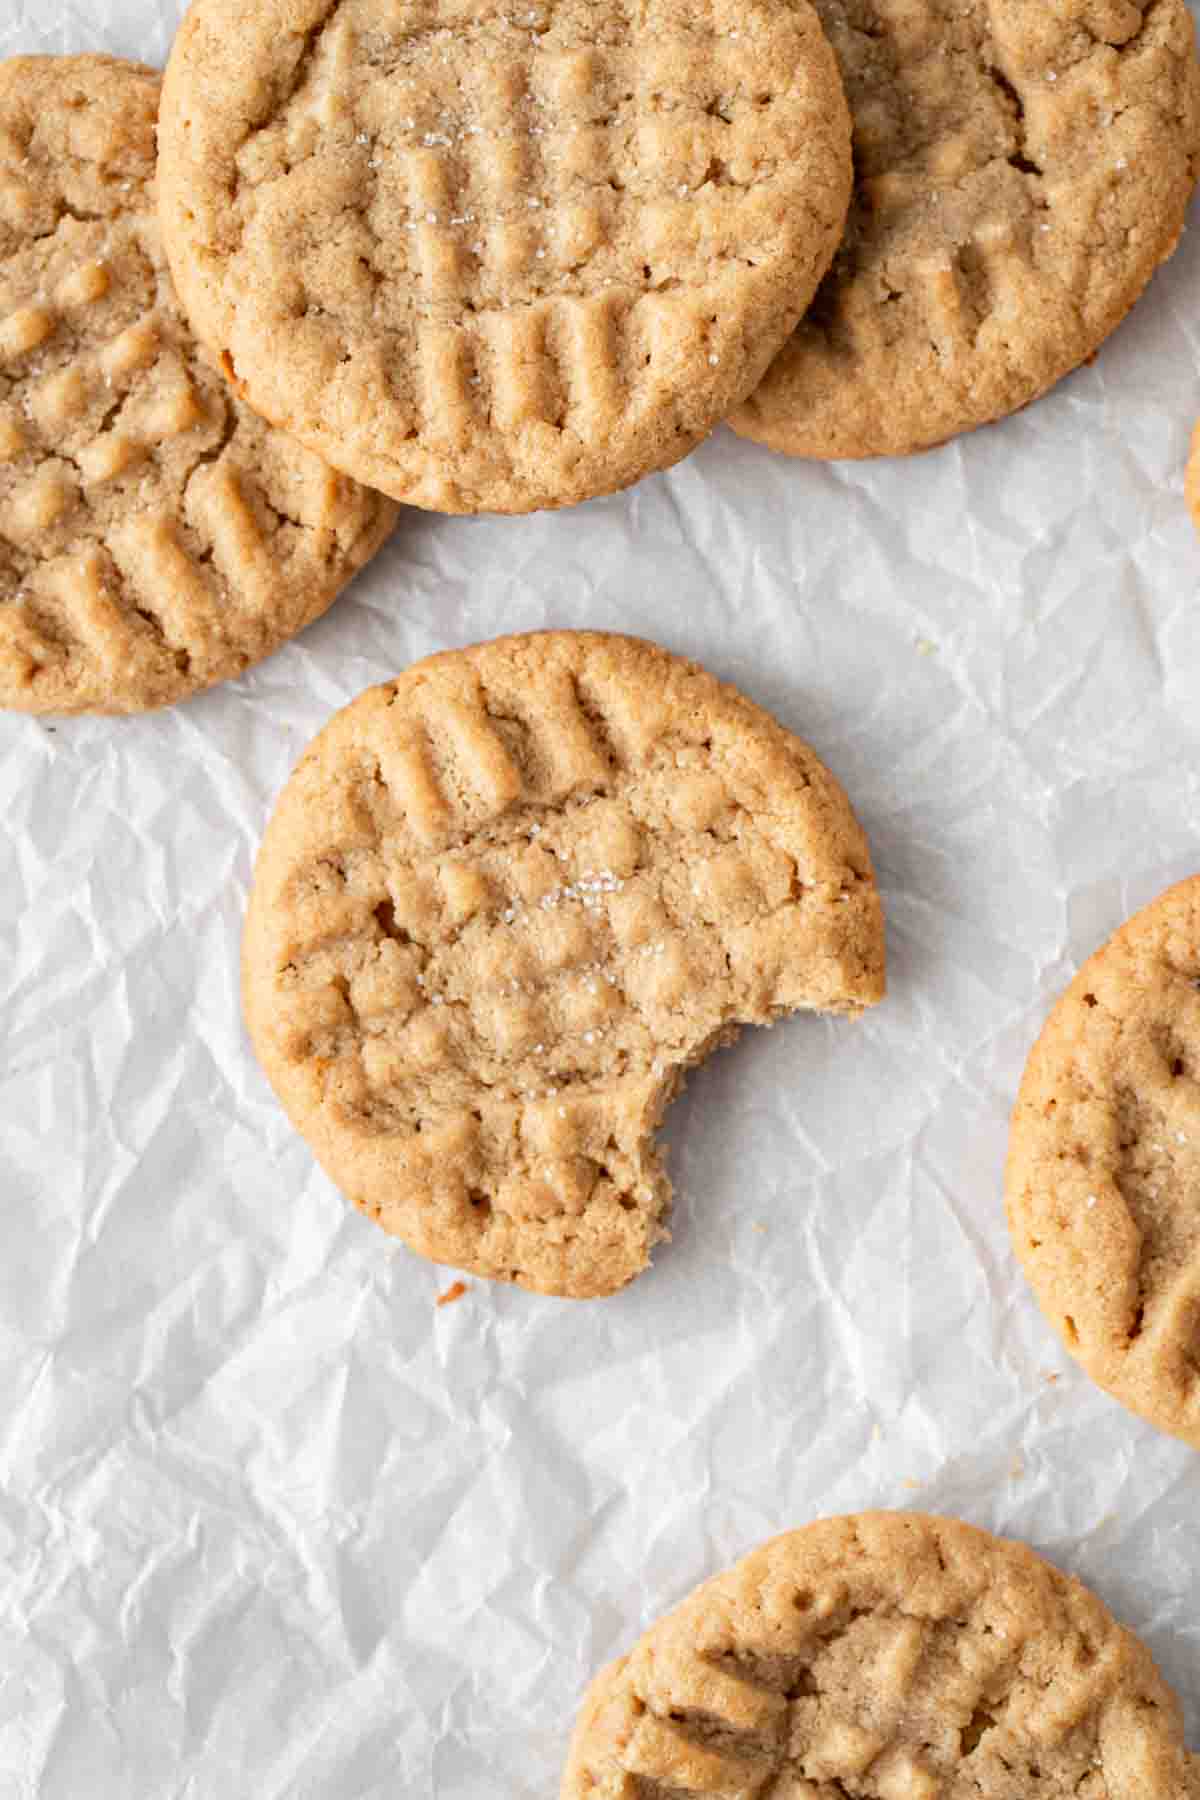 Close up of a peanut butter cookie with a bite taken.